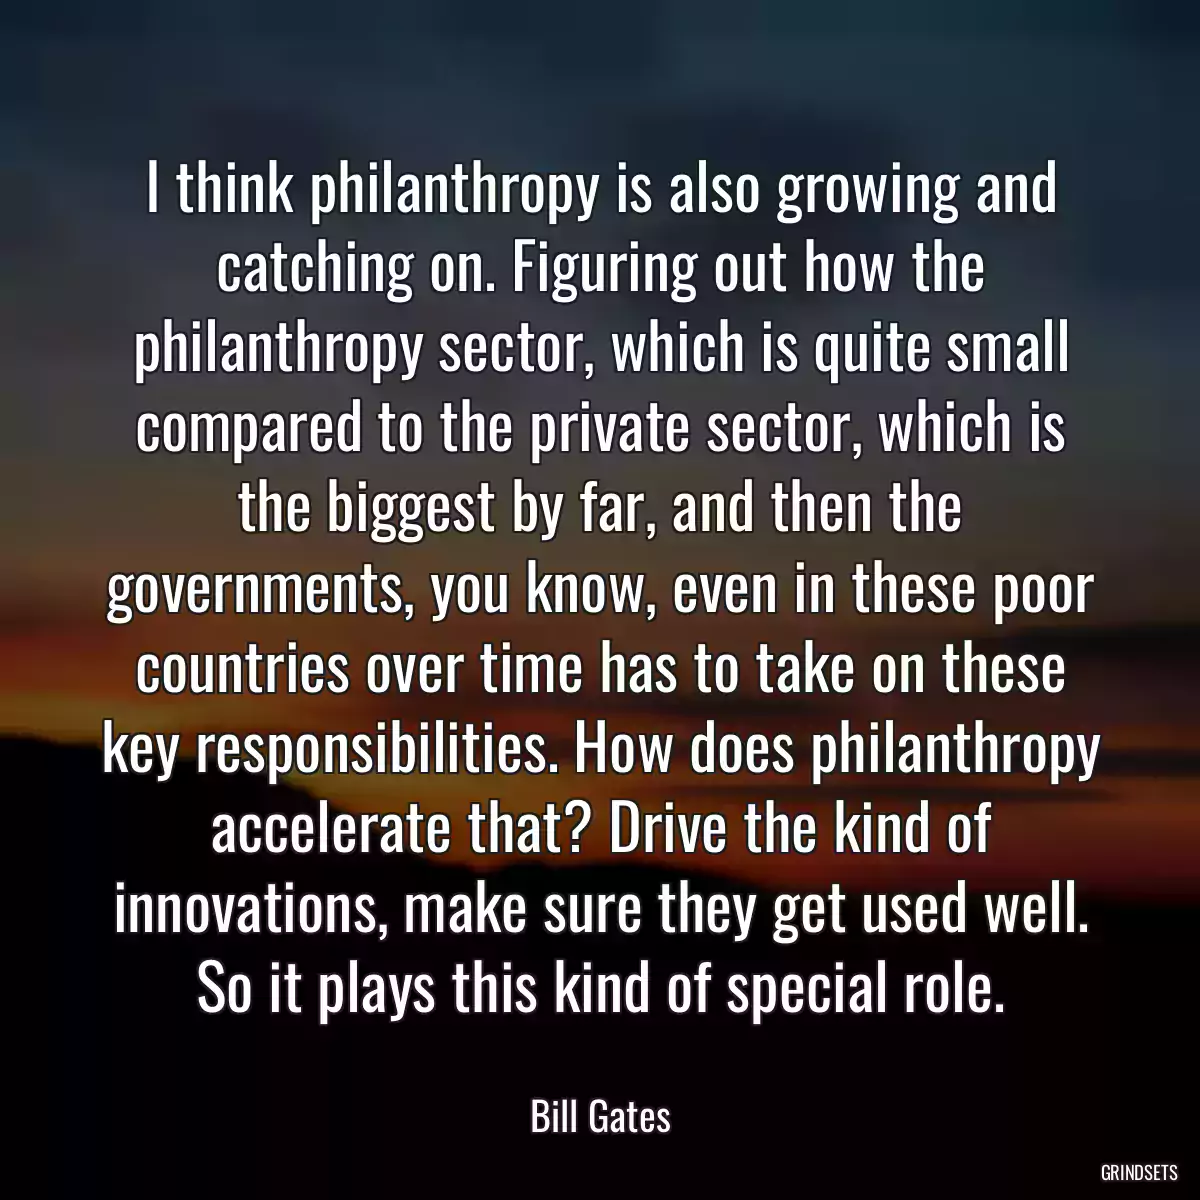 I think philanthropy is also growing and catching on. Figuring out how the philanthropy sector, which is quite small compared to the private sector, which is the biggest by far, and then the governments, you know, even in these poor countries over time has to take on these key responsibilities. How does philanthropy accelerate that? Drive the kind of innovations, make sure they get used well. So it plays this kind of special role.